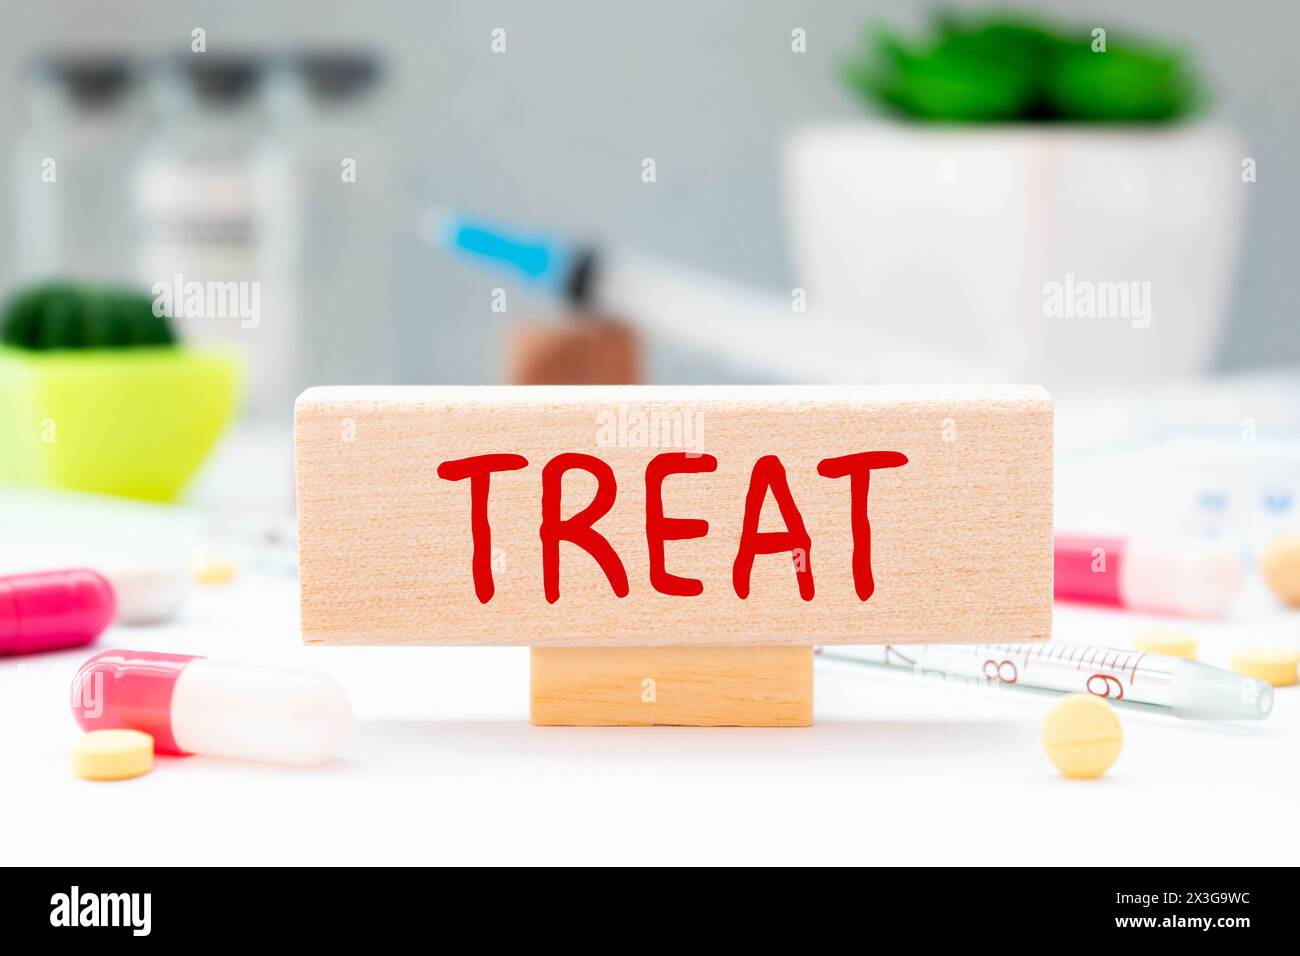 TREAT word on notebook with medical equipment on a background. Stock Photo